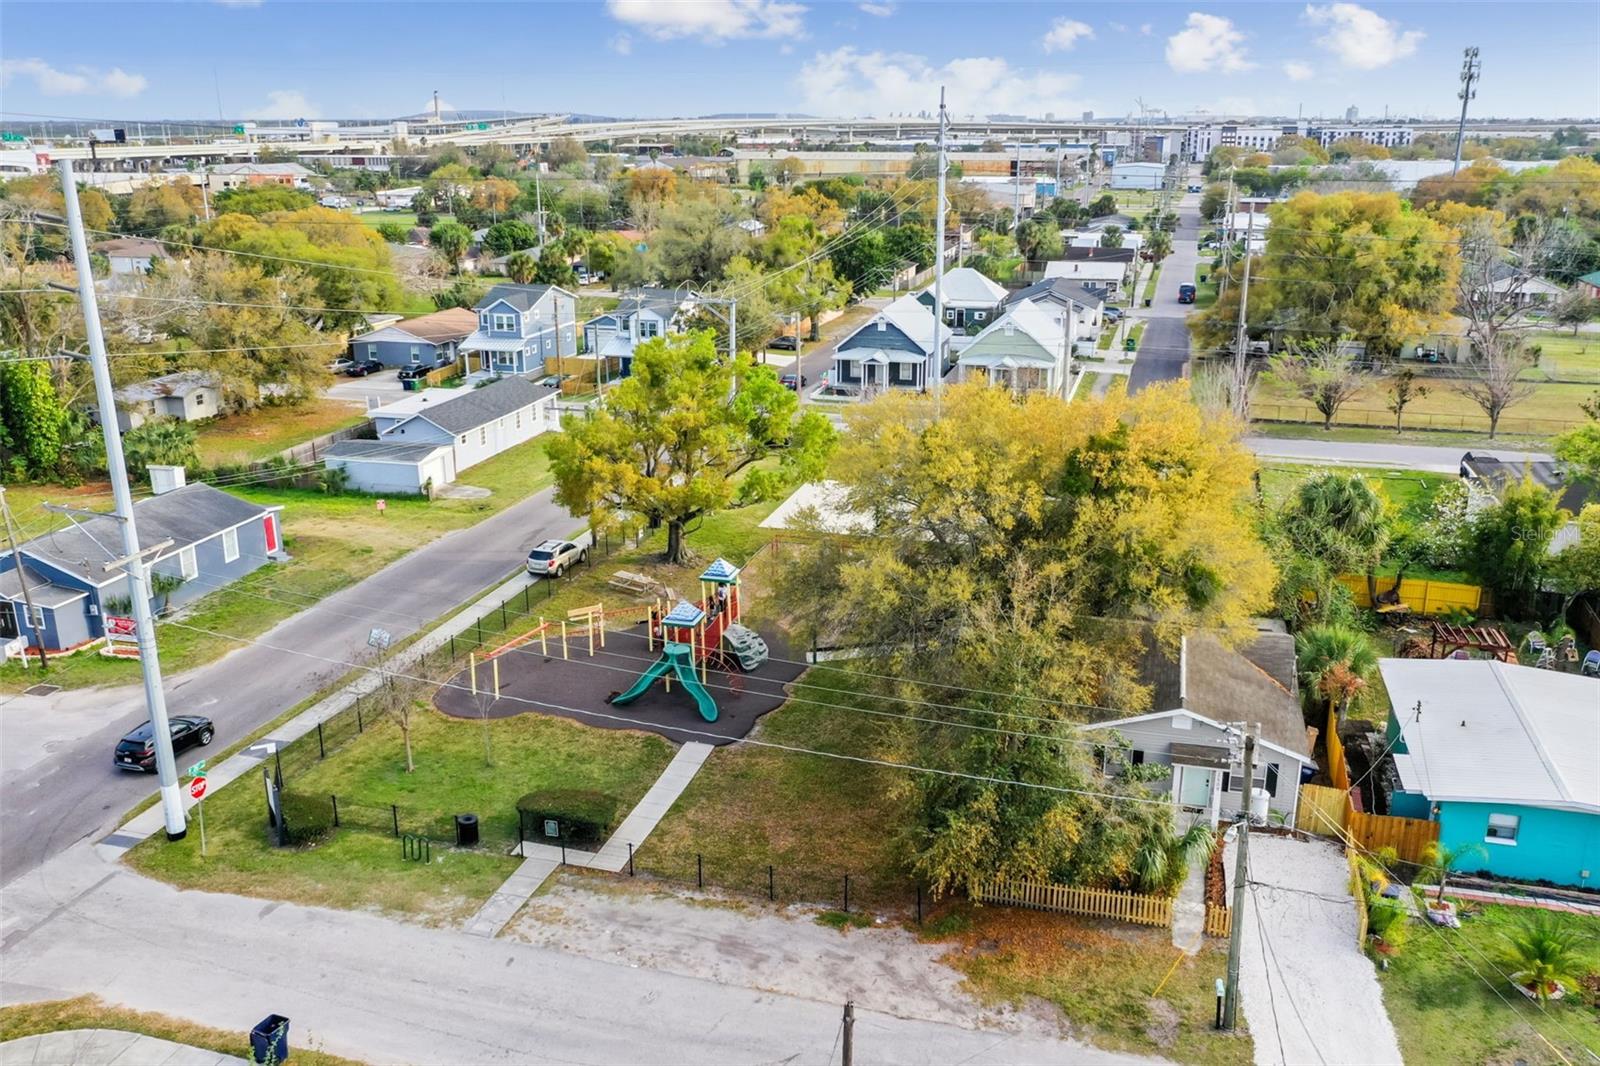 Beautiful East Ybor Park surrounds property to East and South sides! Left side yard and back yard view the park!